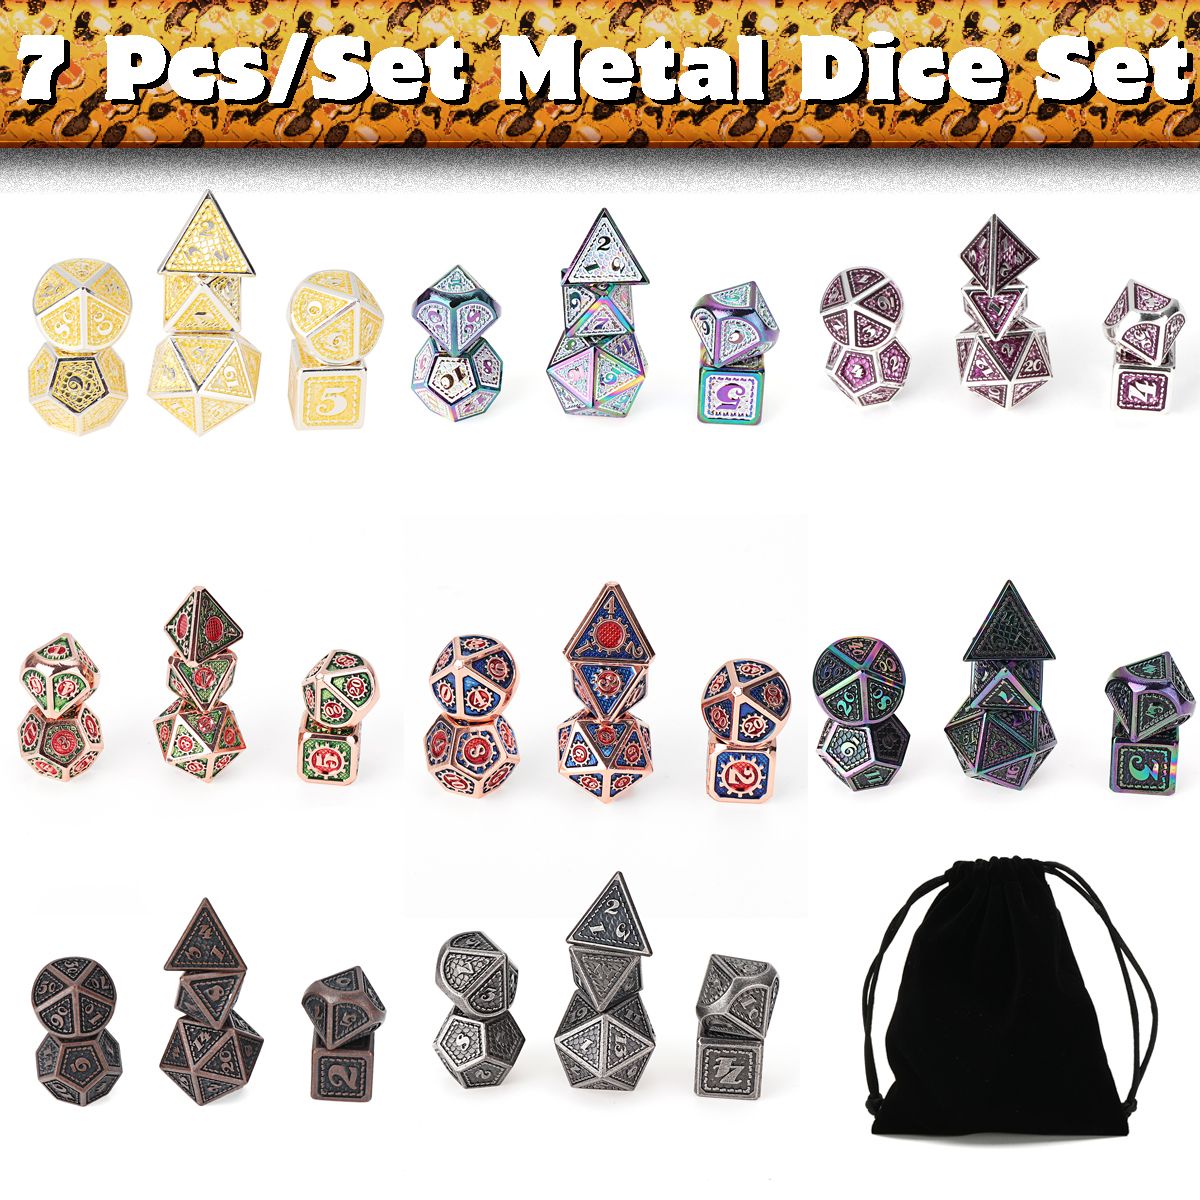 Beutiful-Color-Metal-Polyhedral-Dice-Multi-side-Dice-Set-For-DND-RPG-MTG-Role-Playing-Board-Game-Wit-1716609